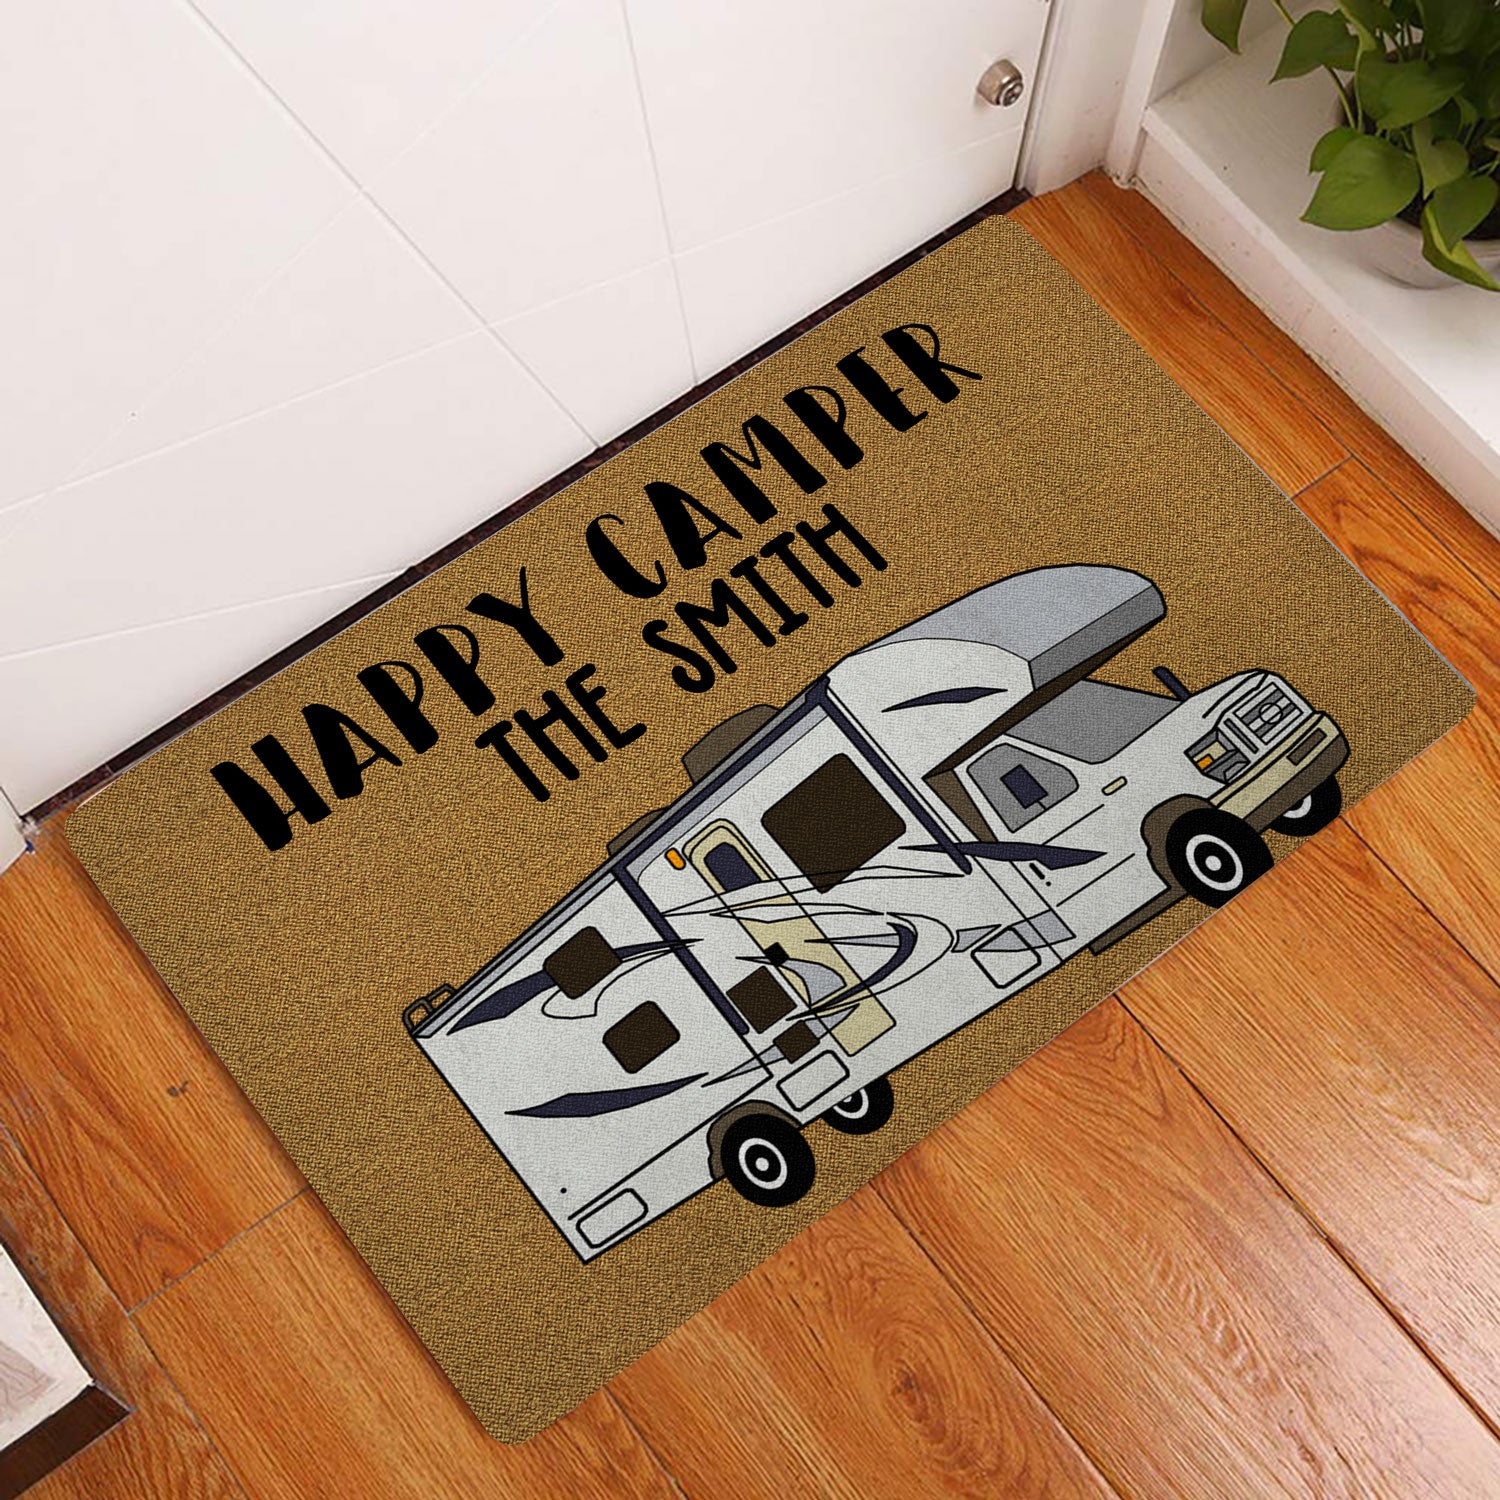 Happy Camper - Personalized Doormat  Personalized door mats, Door mat,  Happy campers